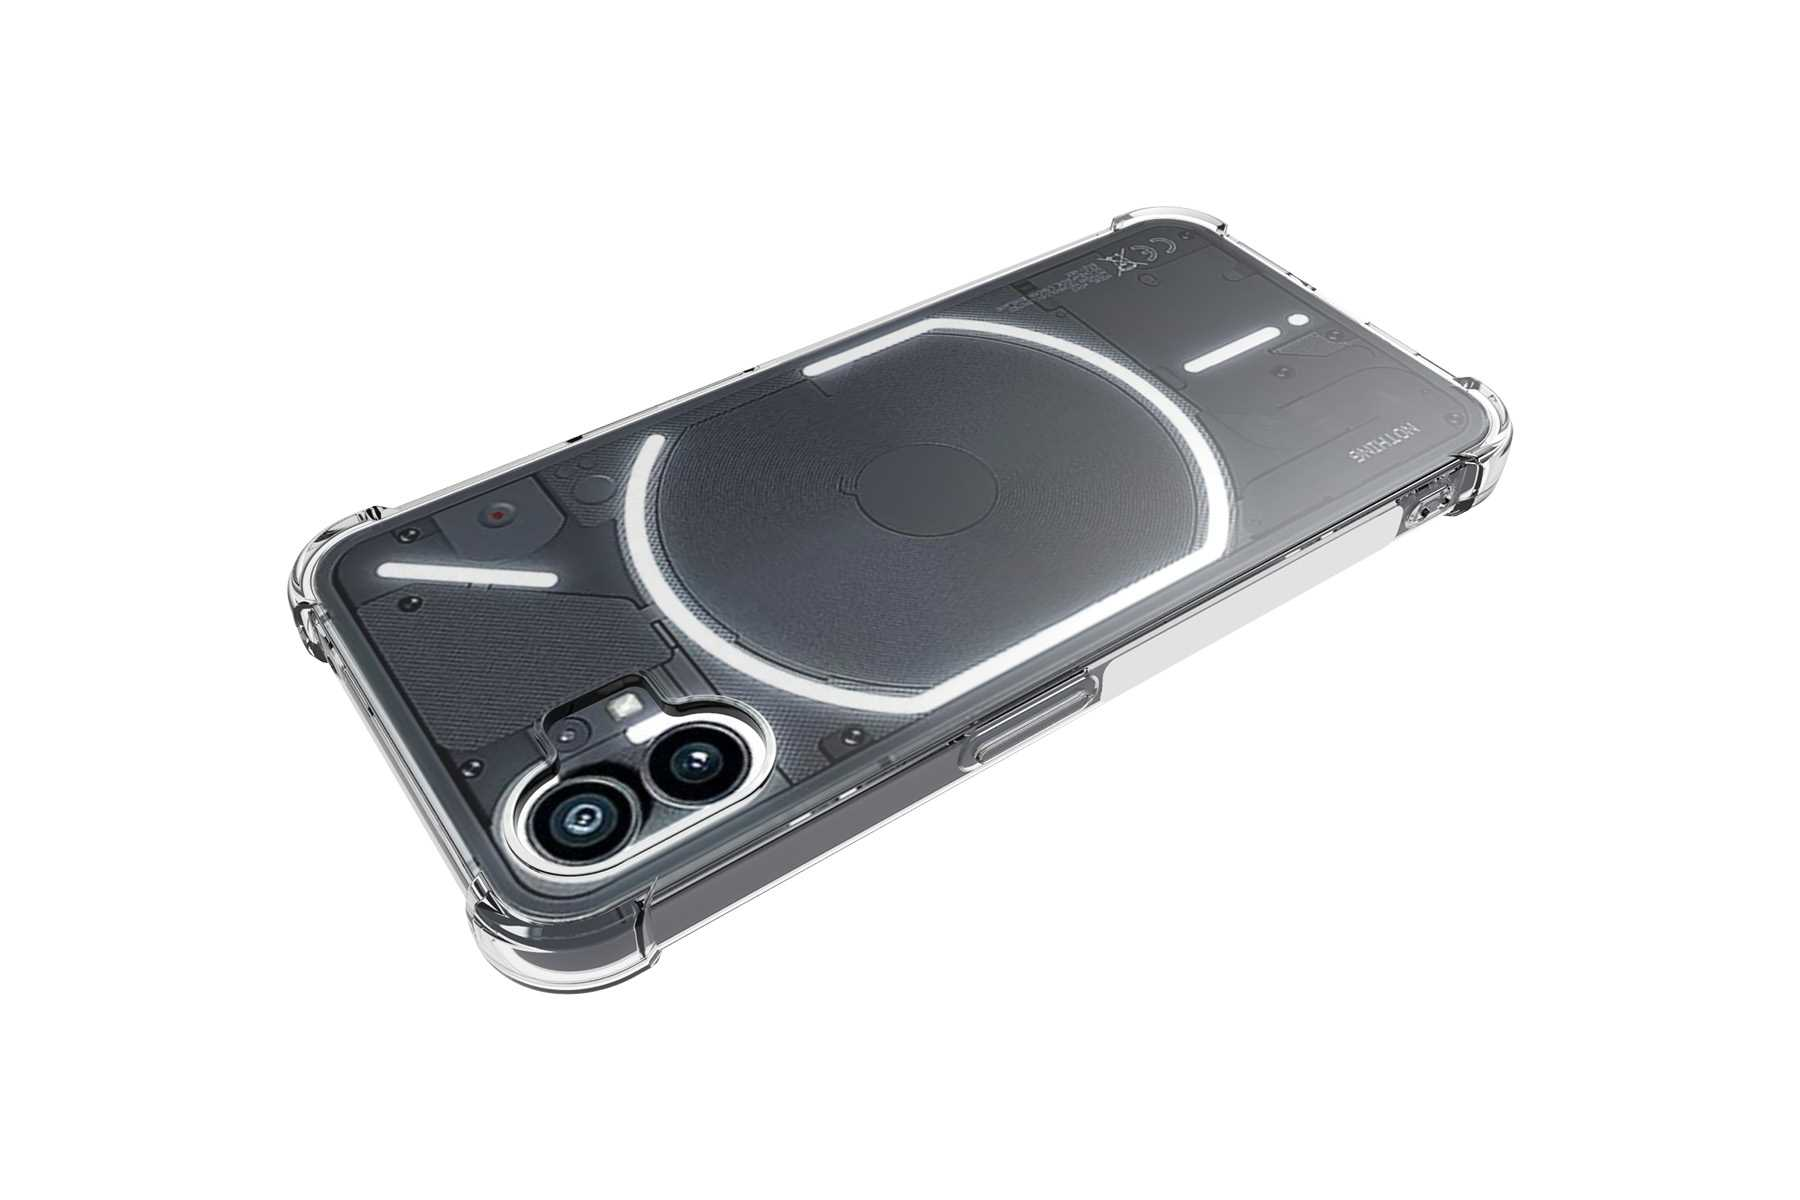 Clear Armor Nothing, Transparent ENERGY MTB (1), Case, MORE Phone Backcover,